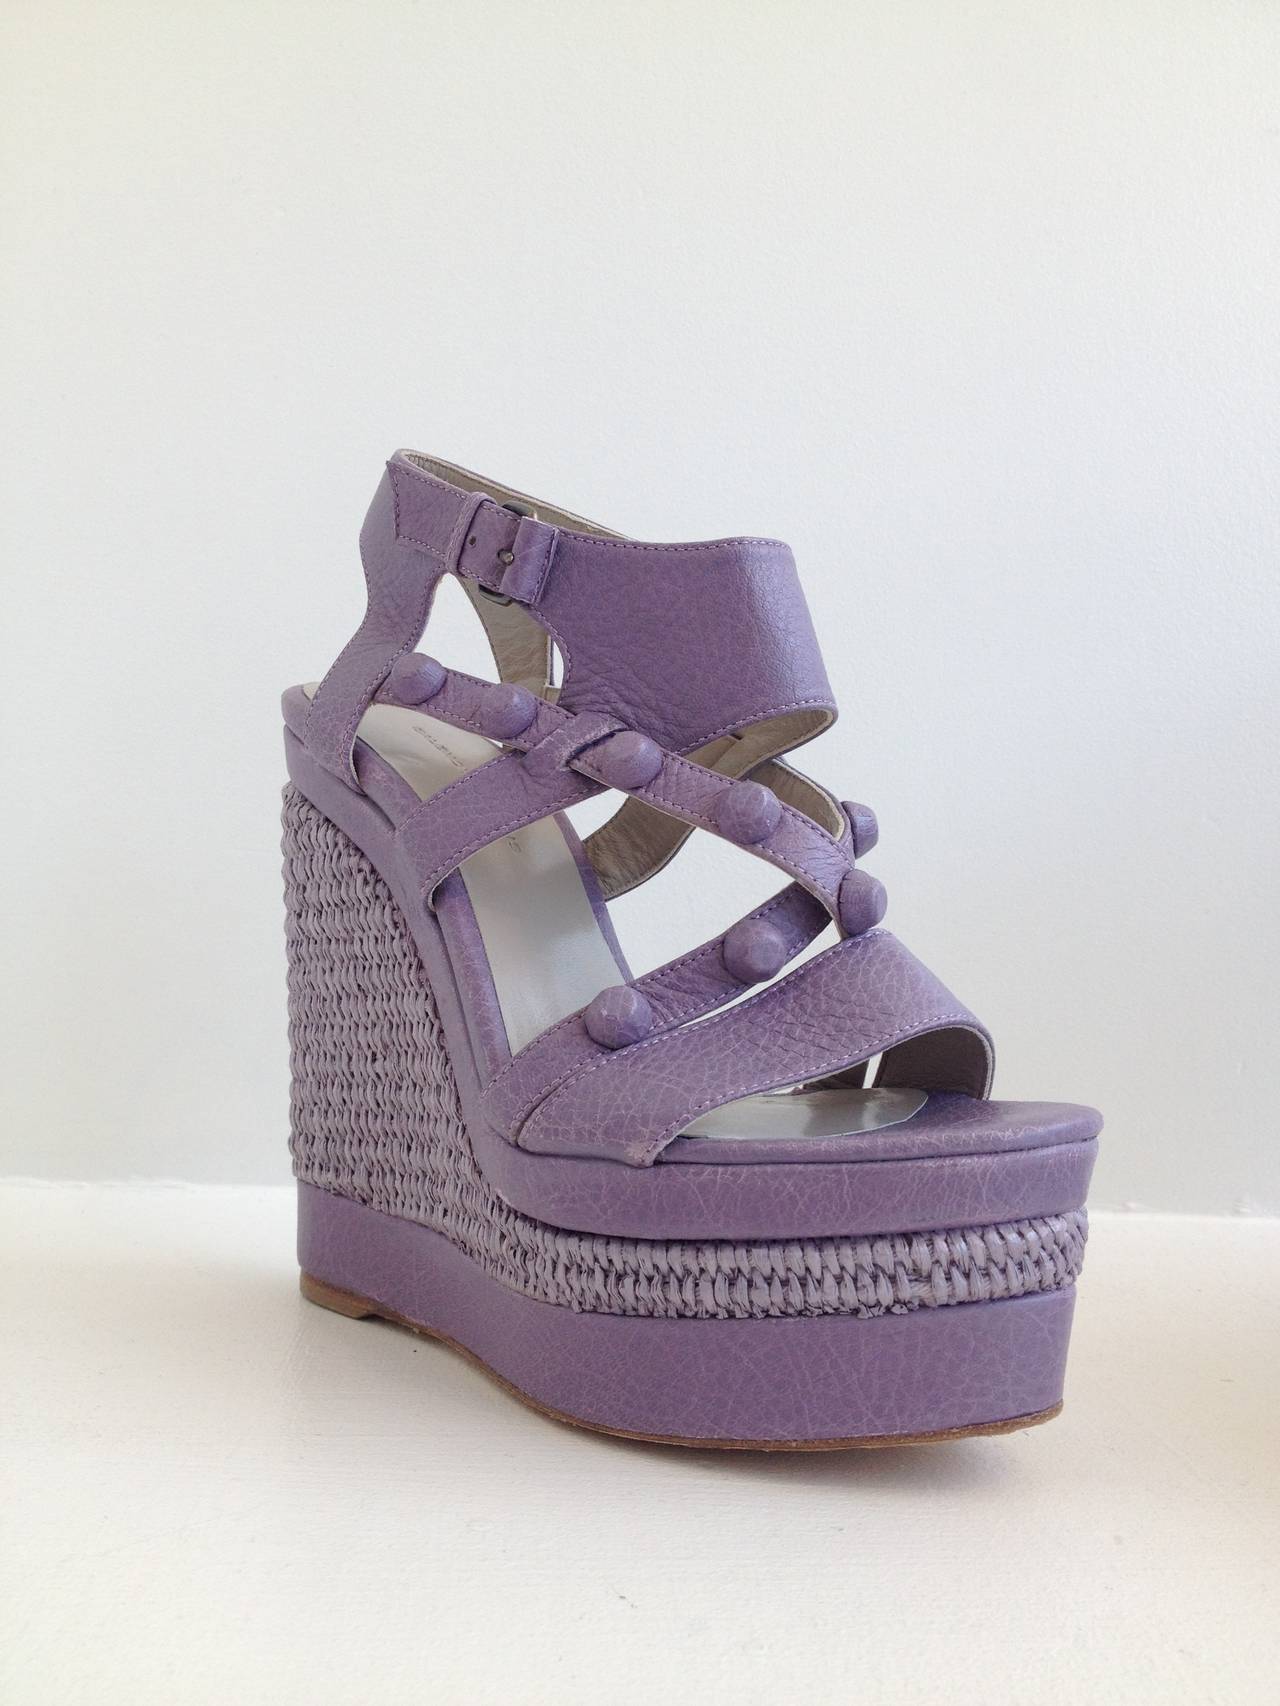 Stand tall! These Balenciaga wedges are perfect for making a statement. The soft lavender is easy and sweet, while the iconic Balenciaga conical studs - in this case covered in leather - add a little edge. The super tall 5.5